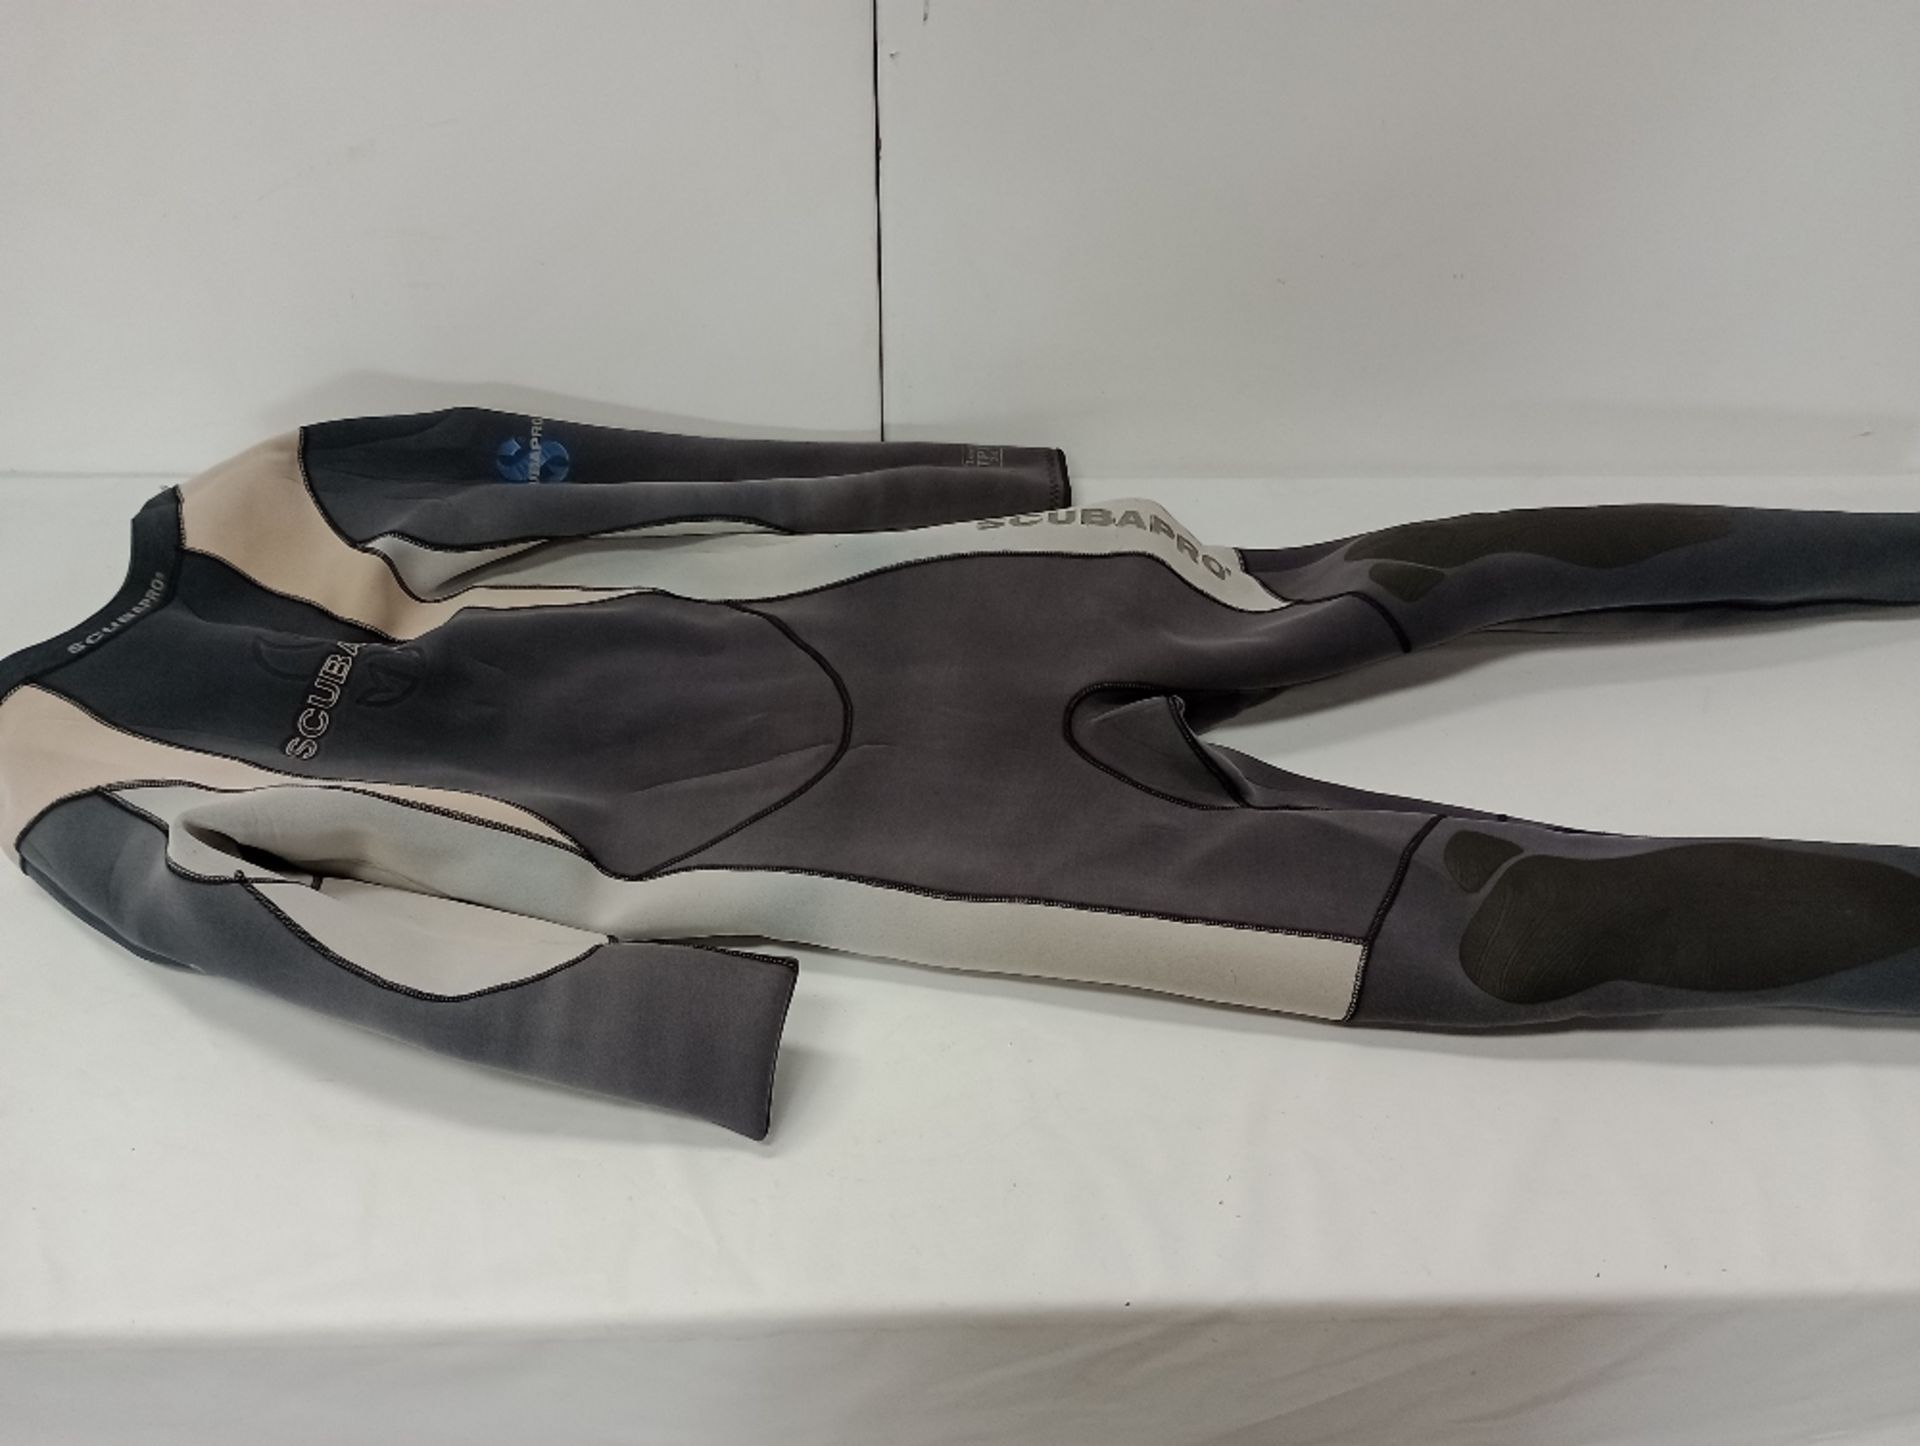 Collection of Wetsuits (Location: Brentwood. Please Refer to General Notes) - Image 22 of 37